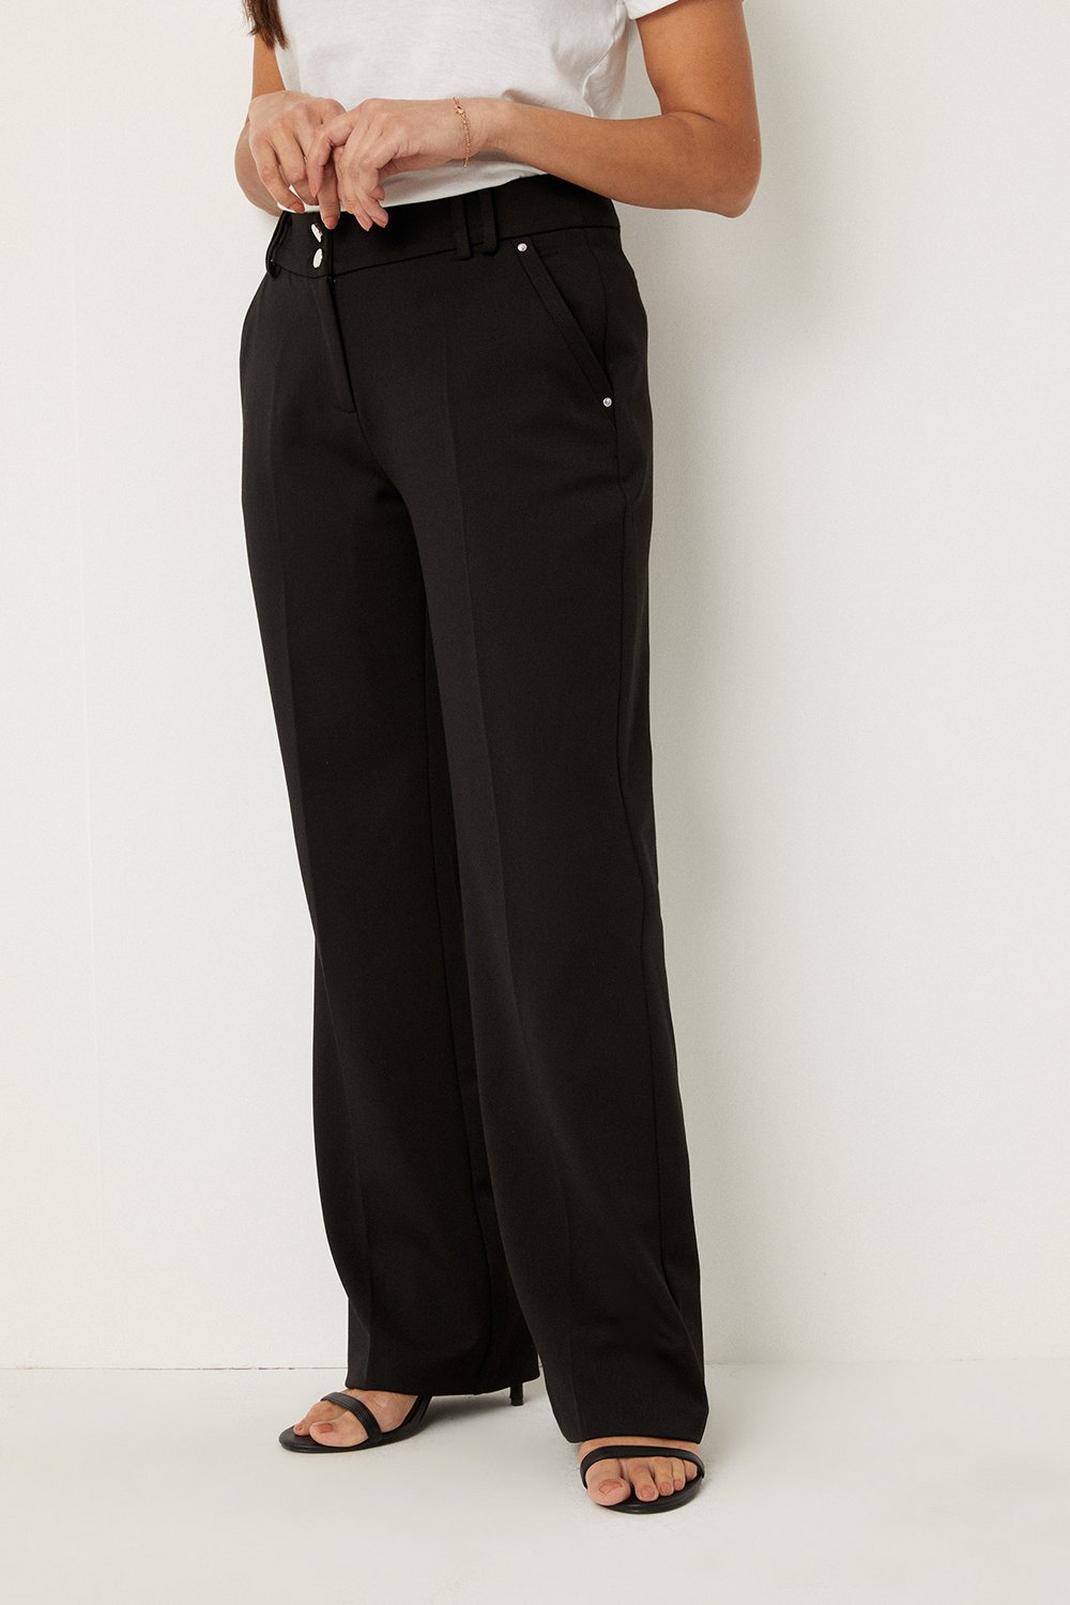 Petite Black Smart Bootcut Trousers image number 1